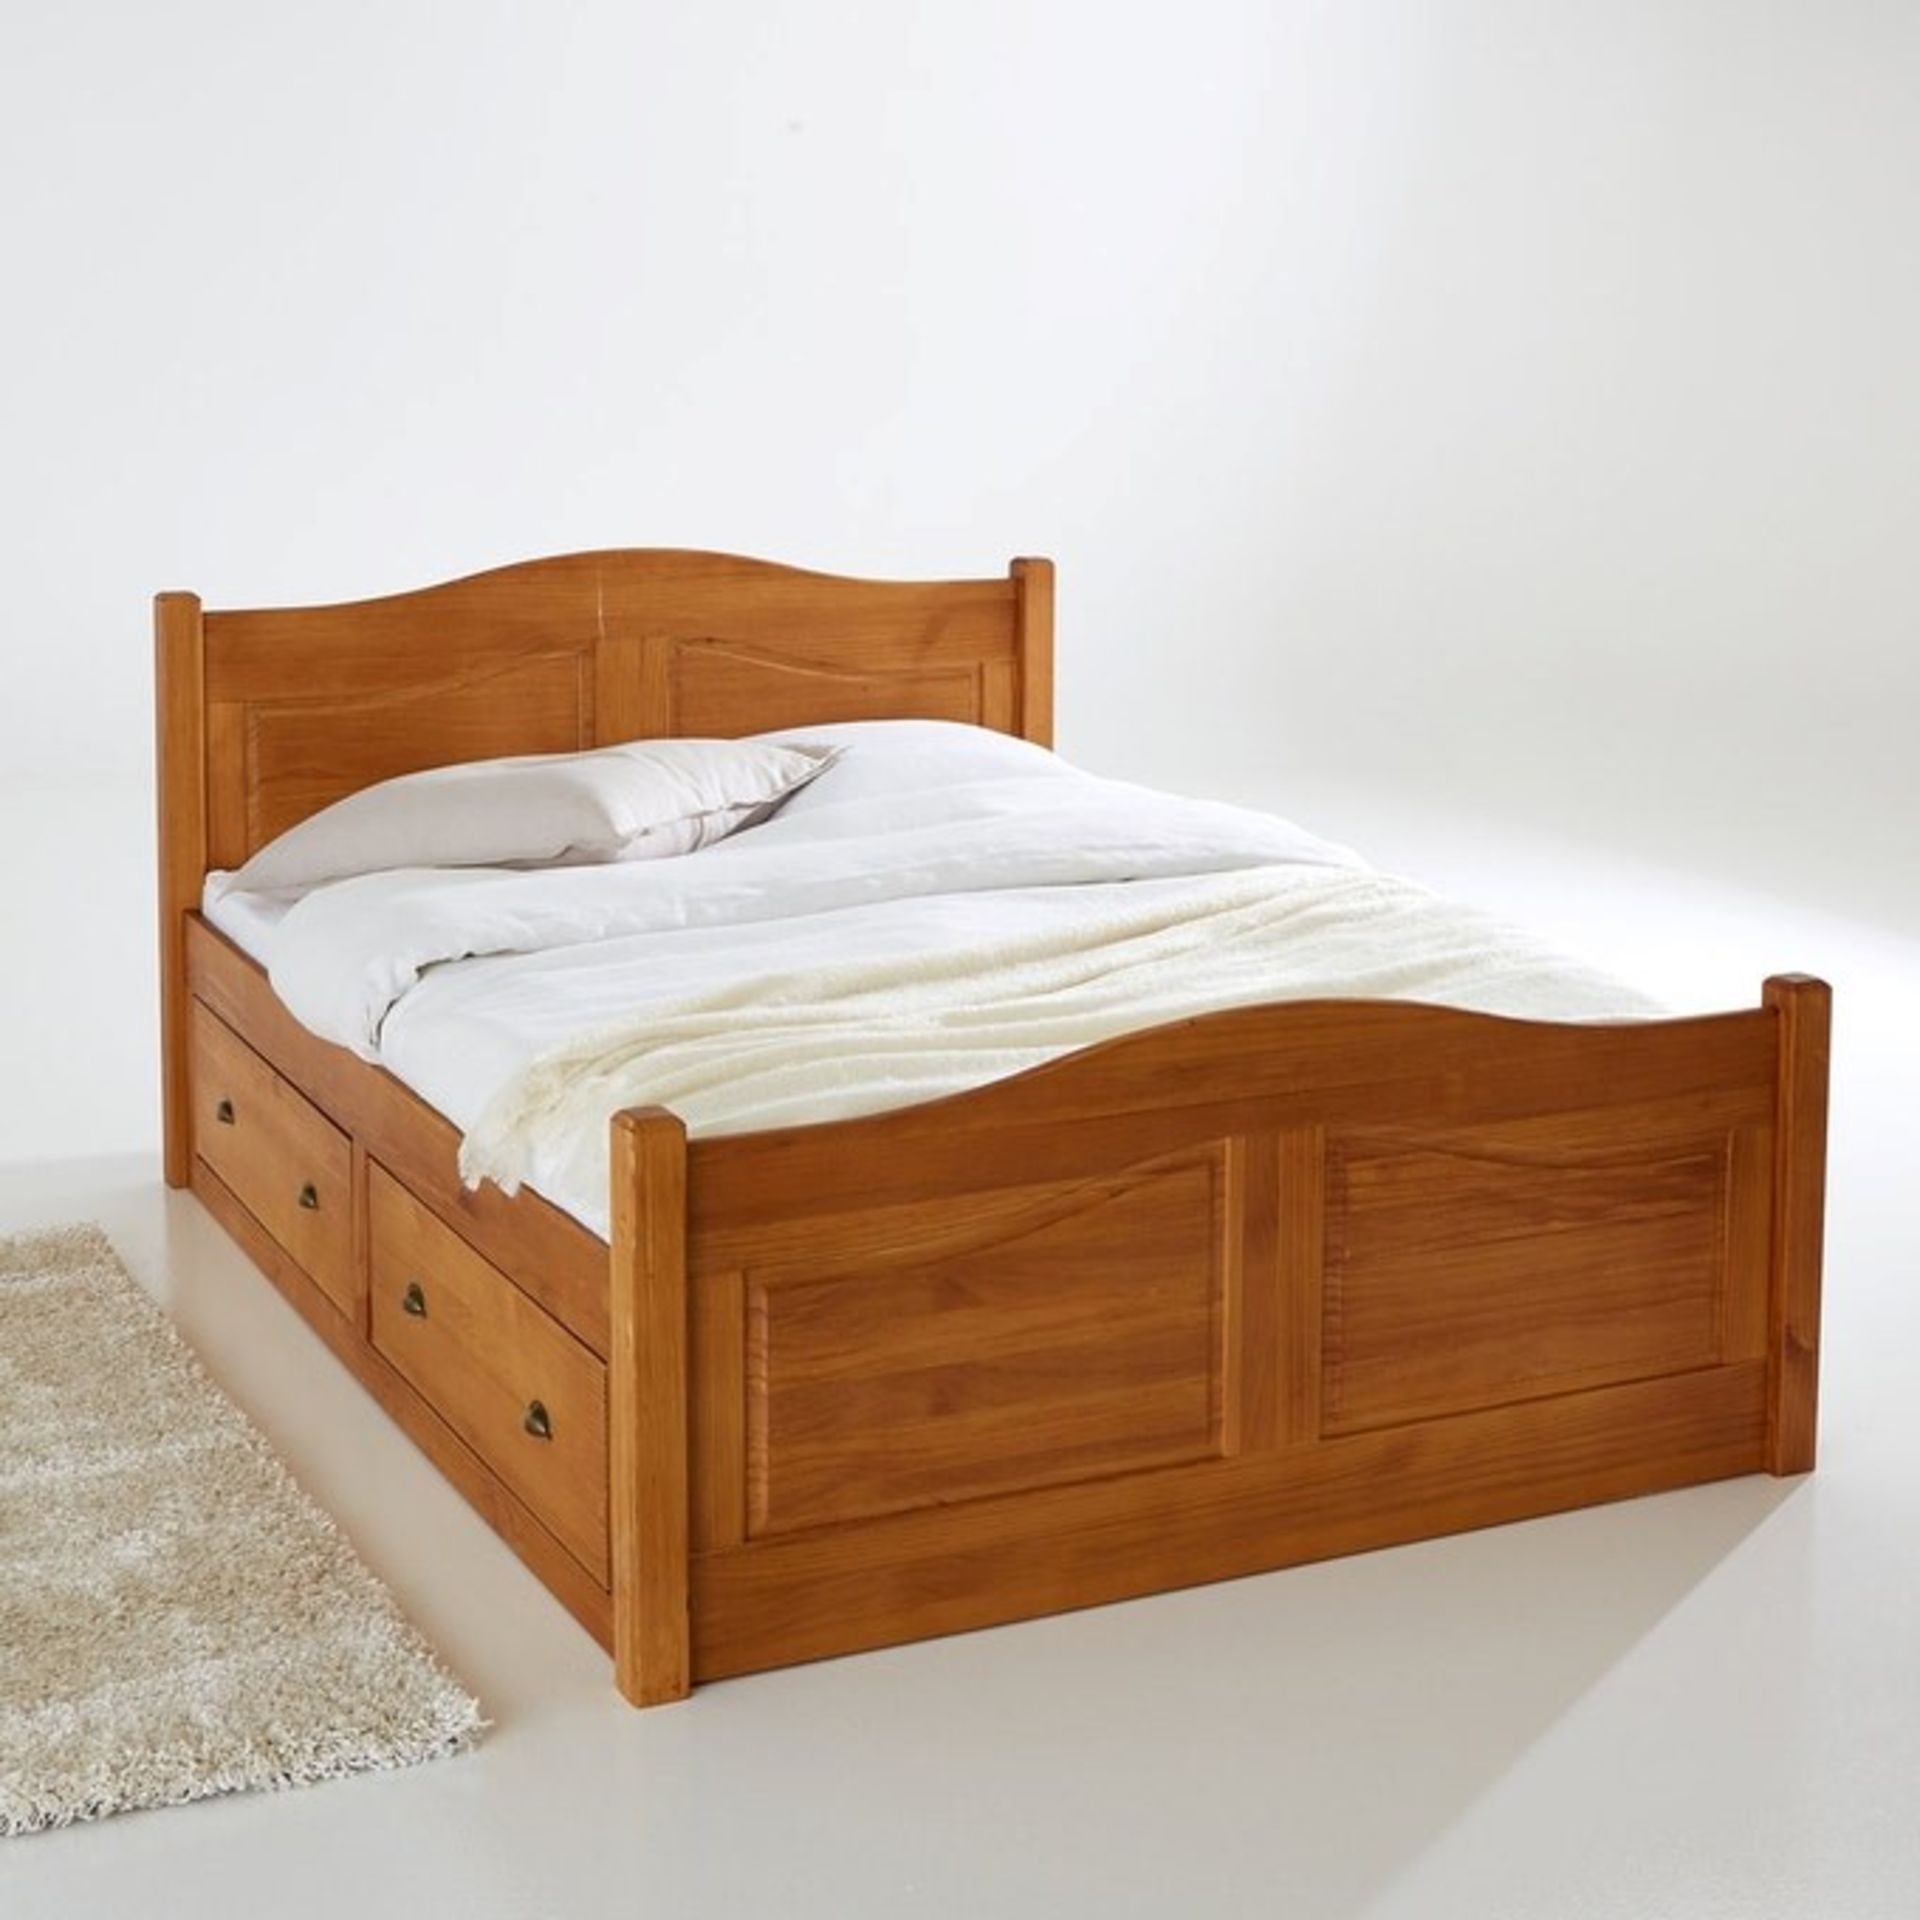 1 GRADE B BOXED DESIGNER AUTHENTIC STYLE SOLID PINE BED WITH 4 DRAWERS WITHOUT SLATS IN NATURAL